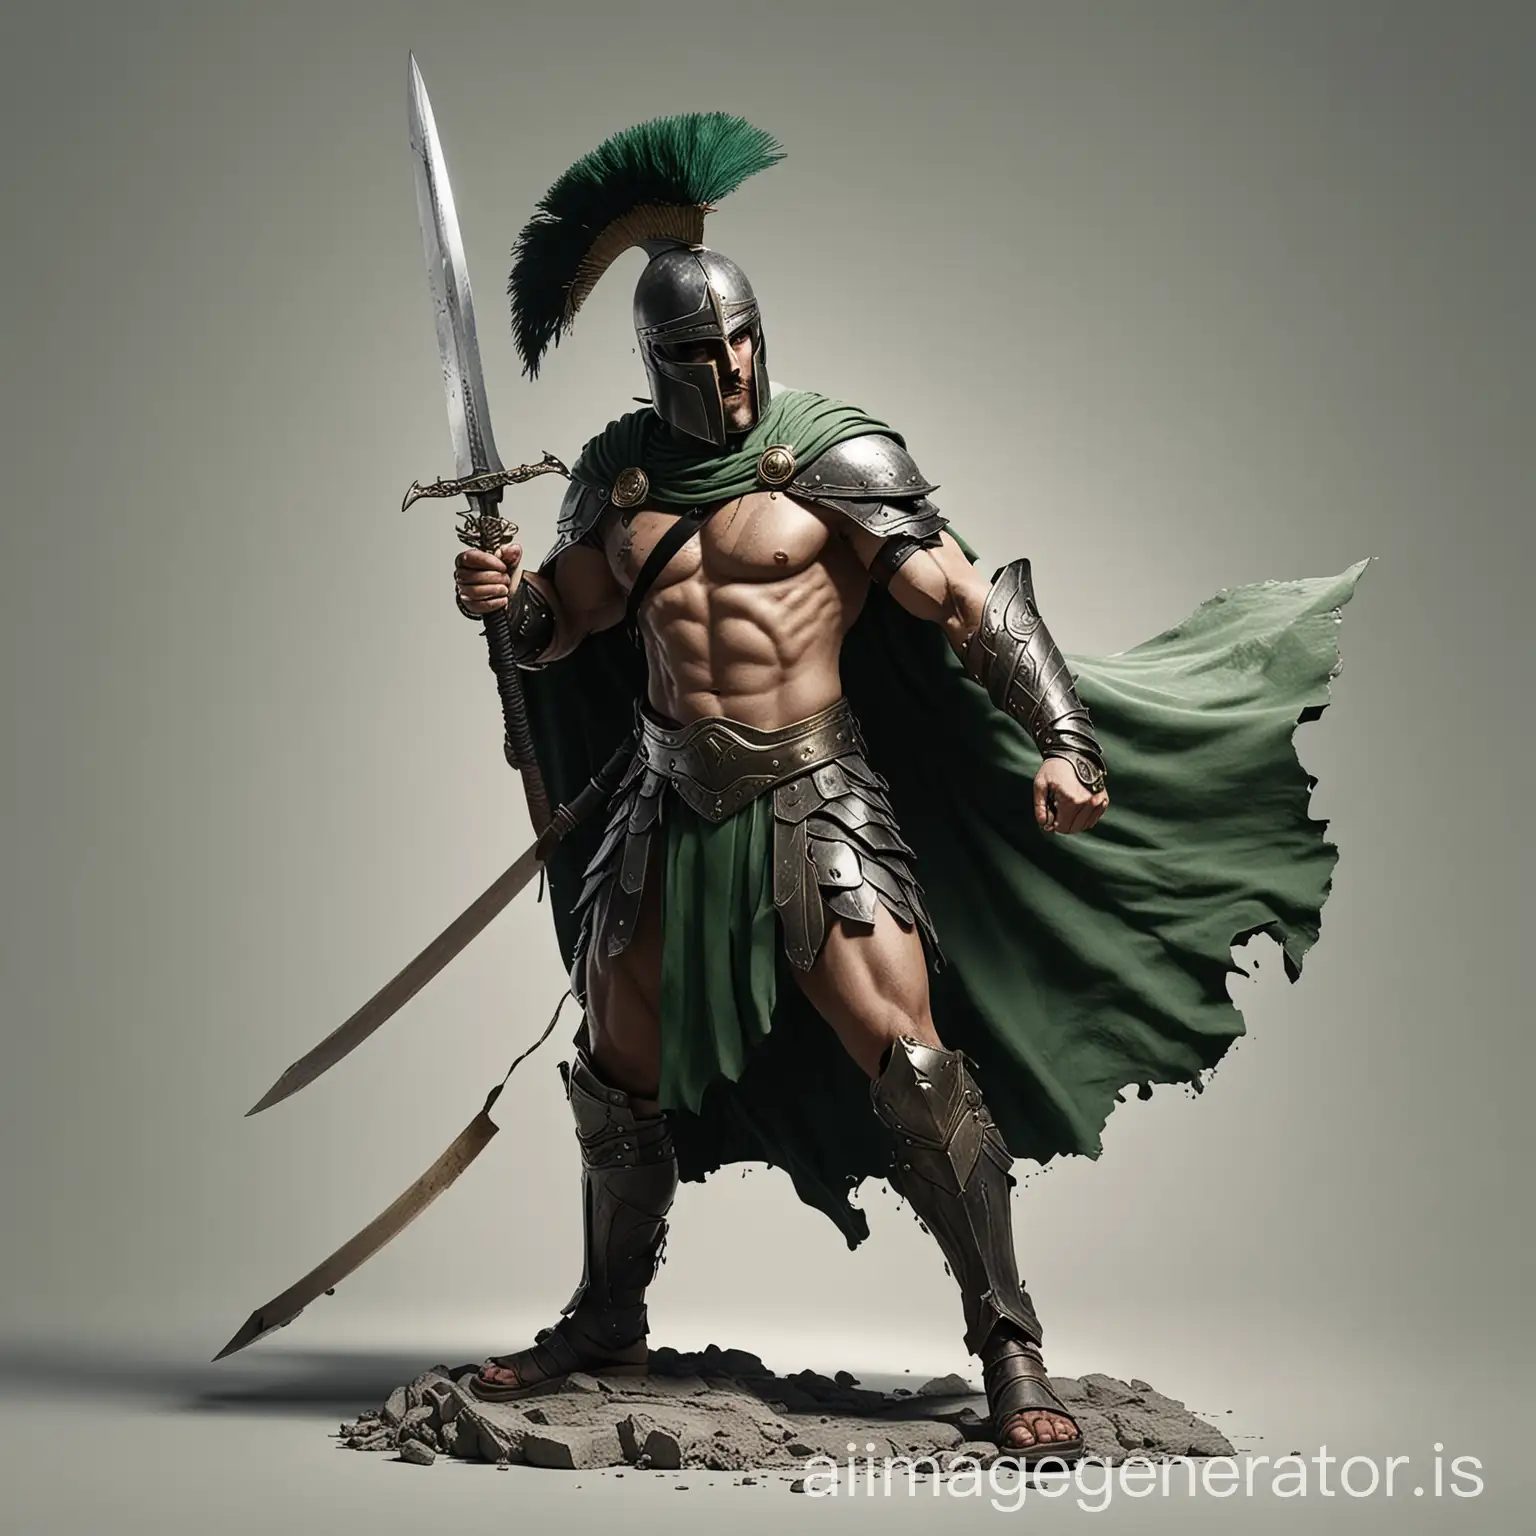 a spartan warrior, captured in a dynamic pose, is the focal point of this minimalist illustration. he's clad in a black helmet, adorned with a green crest, and a green cape trailing behind him. his sword, a sharp, pointed blade, is held aloft in his right hand, ready to strike. his left hand rests on his knee, adding a dynamic element to the composition. the spartan warrior is positioned on a white background, adding a stark contrast to the vibrant colors of his costume.